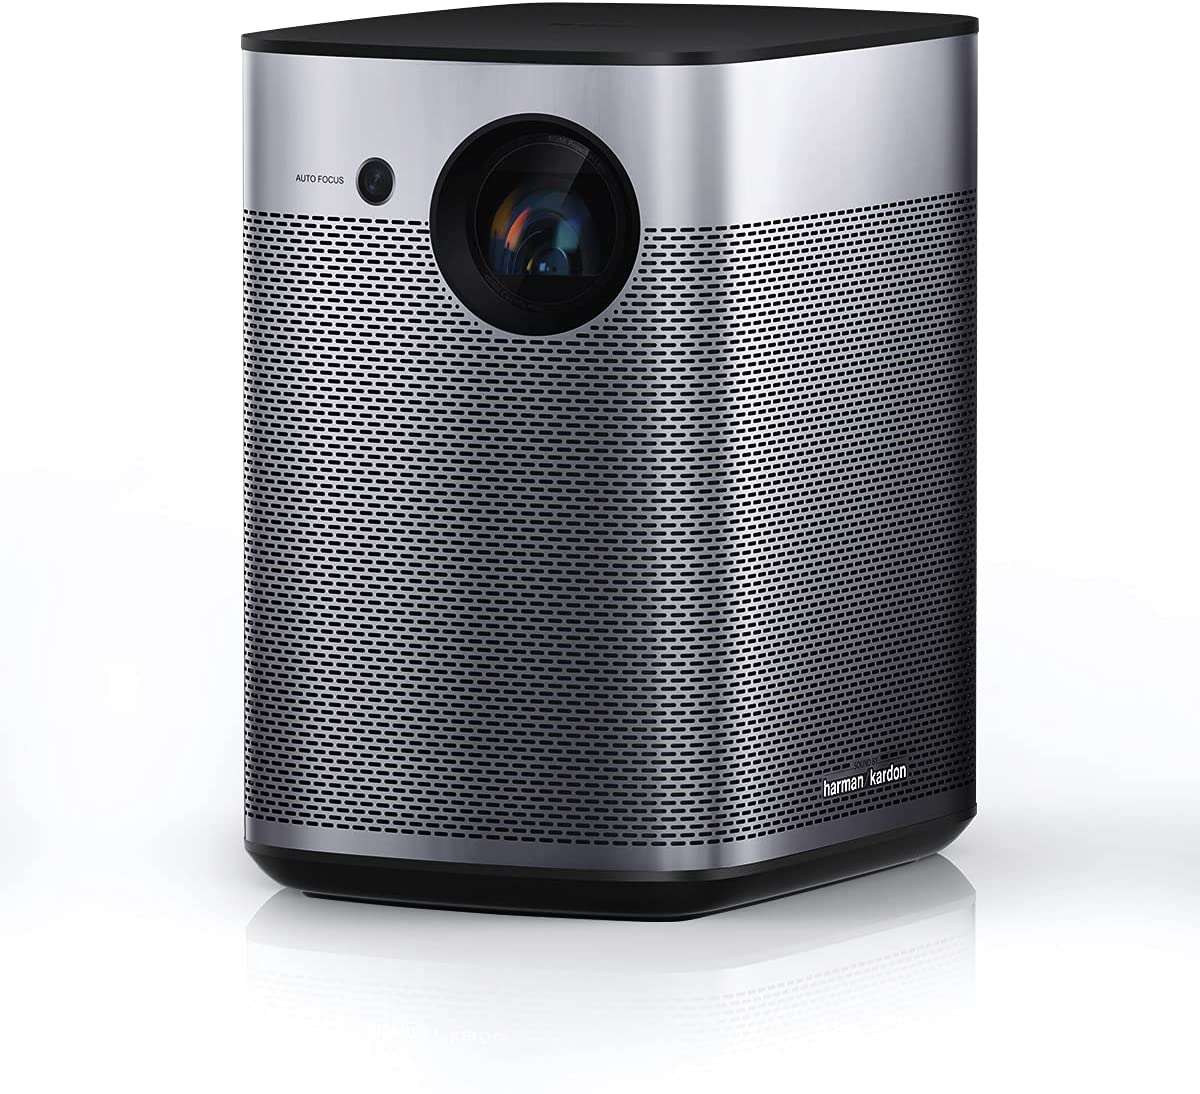 XGIMI Halo Best Projector for Home Theater in 2022